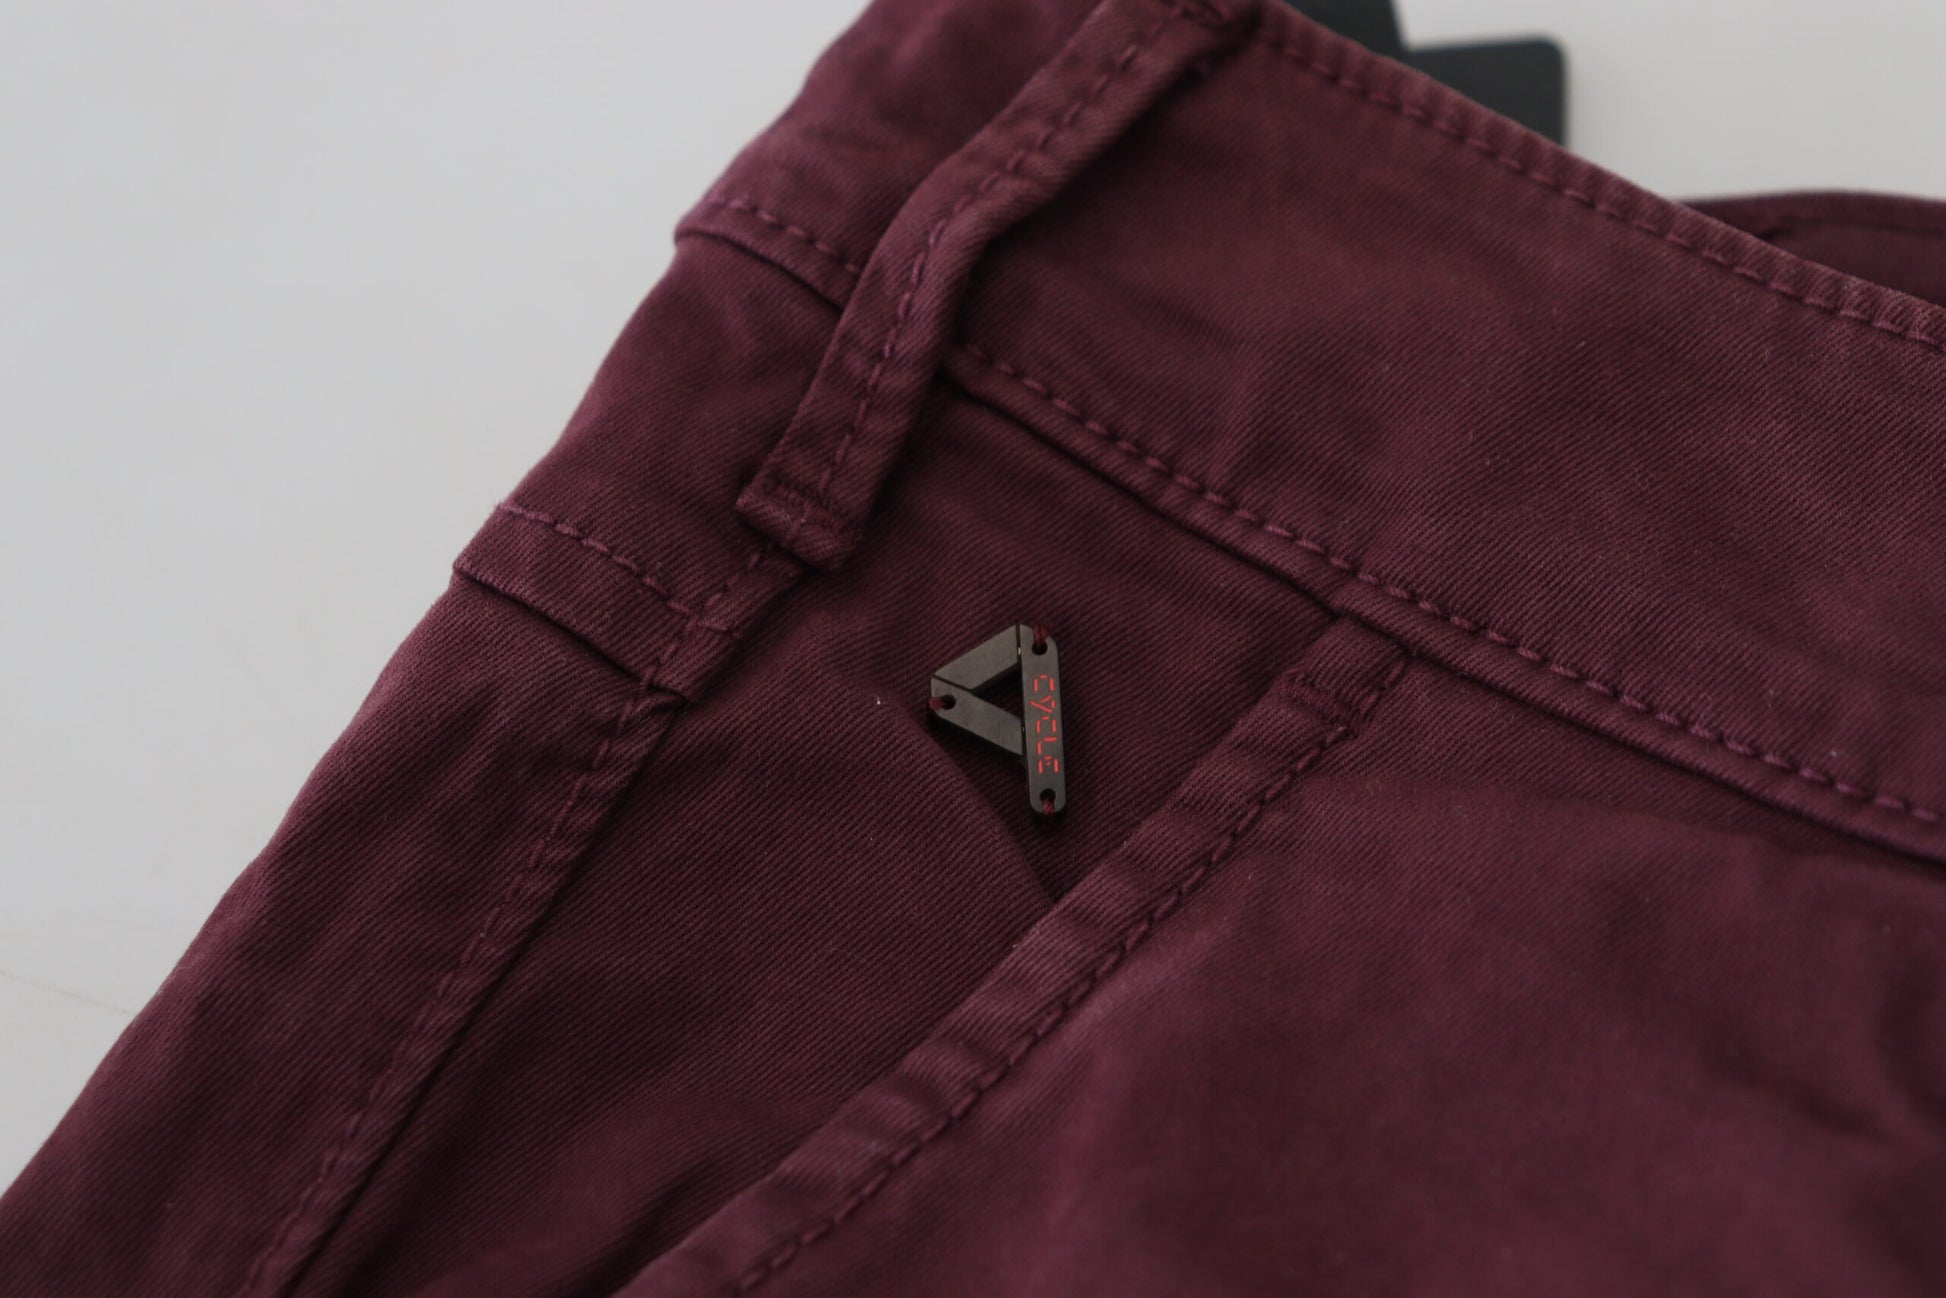 Cycle Maroon Cotton Stretch Skinny Casual Men Pants - Designed by CYCLE Available to Buy at a Discounted Price on Moon Behind The Hill Online Designer Discount Store